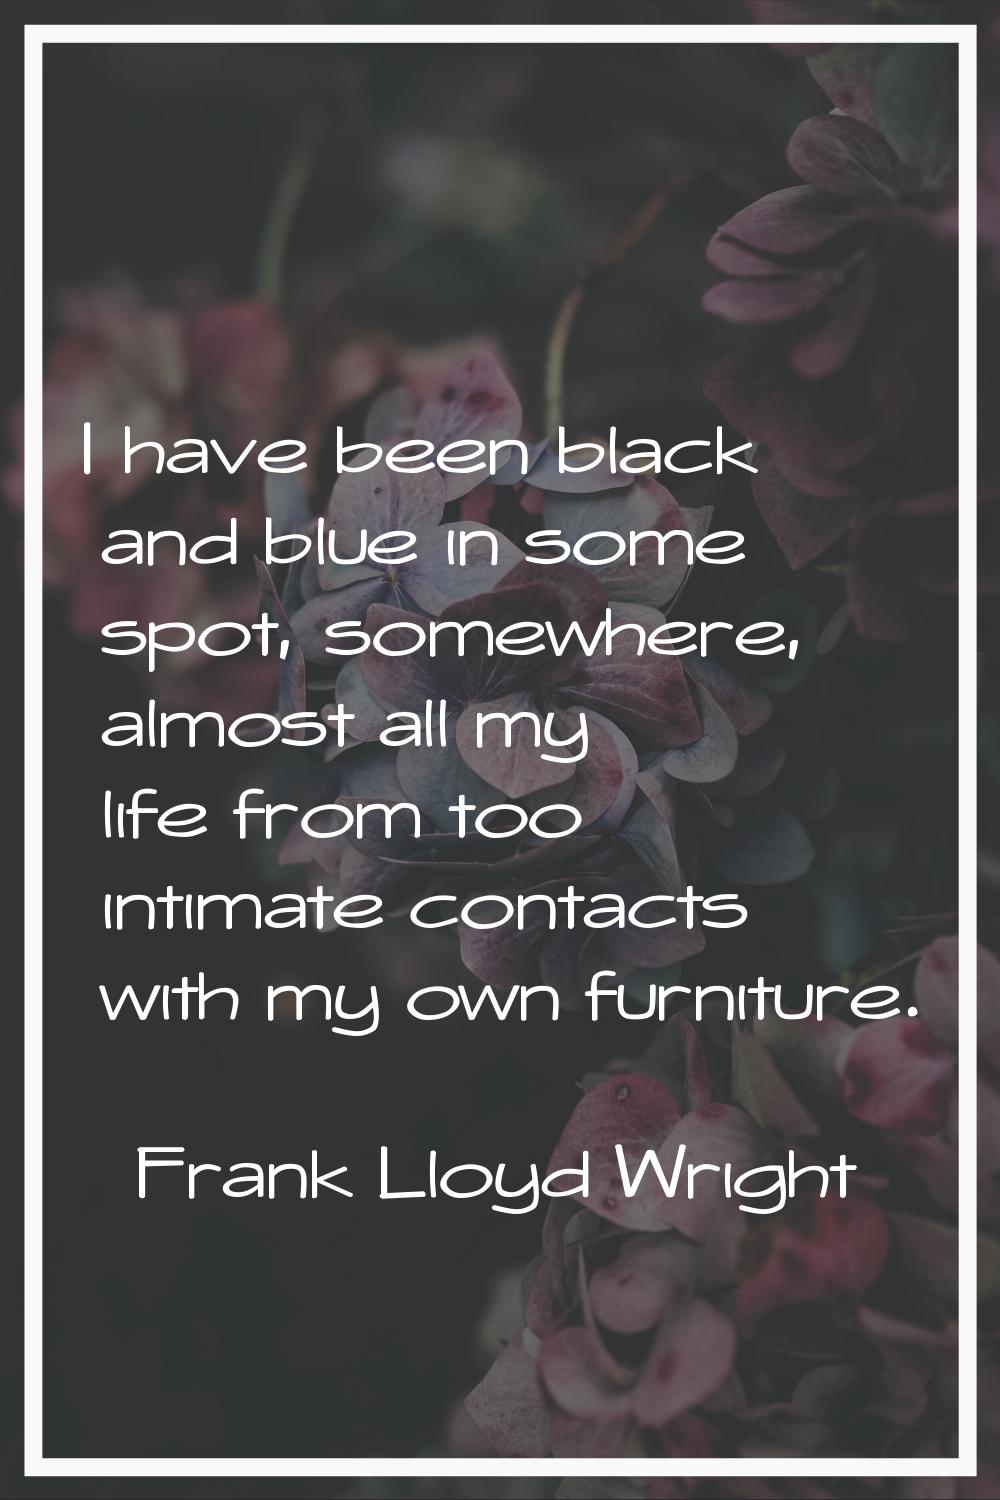 I have been black and blue in some spot, somewhere, almost all my life from too intimate contacts w